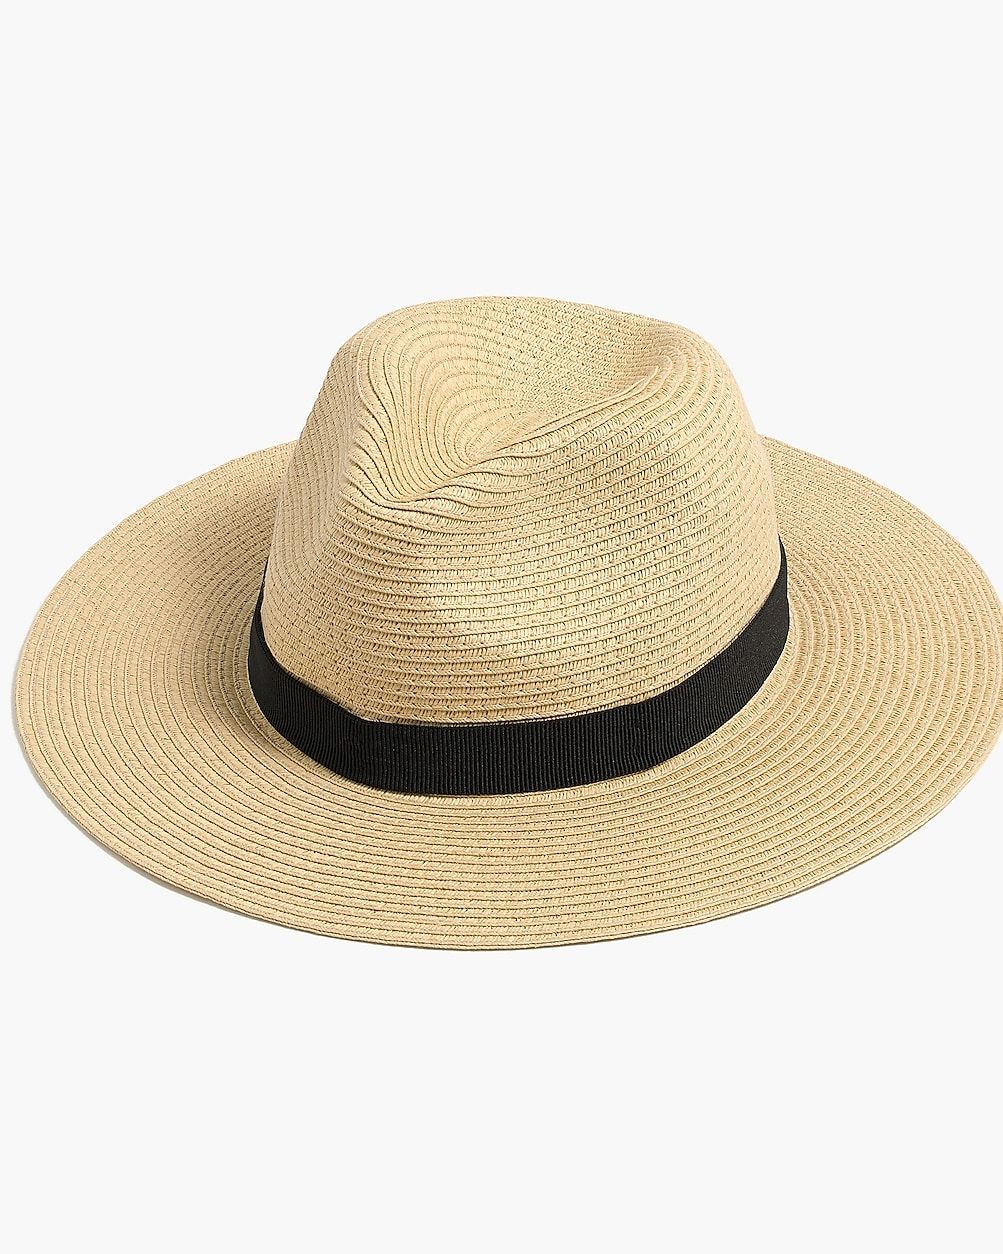 new color4.0(27 REVIEWS)Packable straw hat | J.Crew Factory